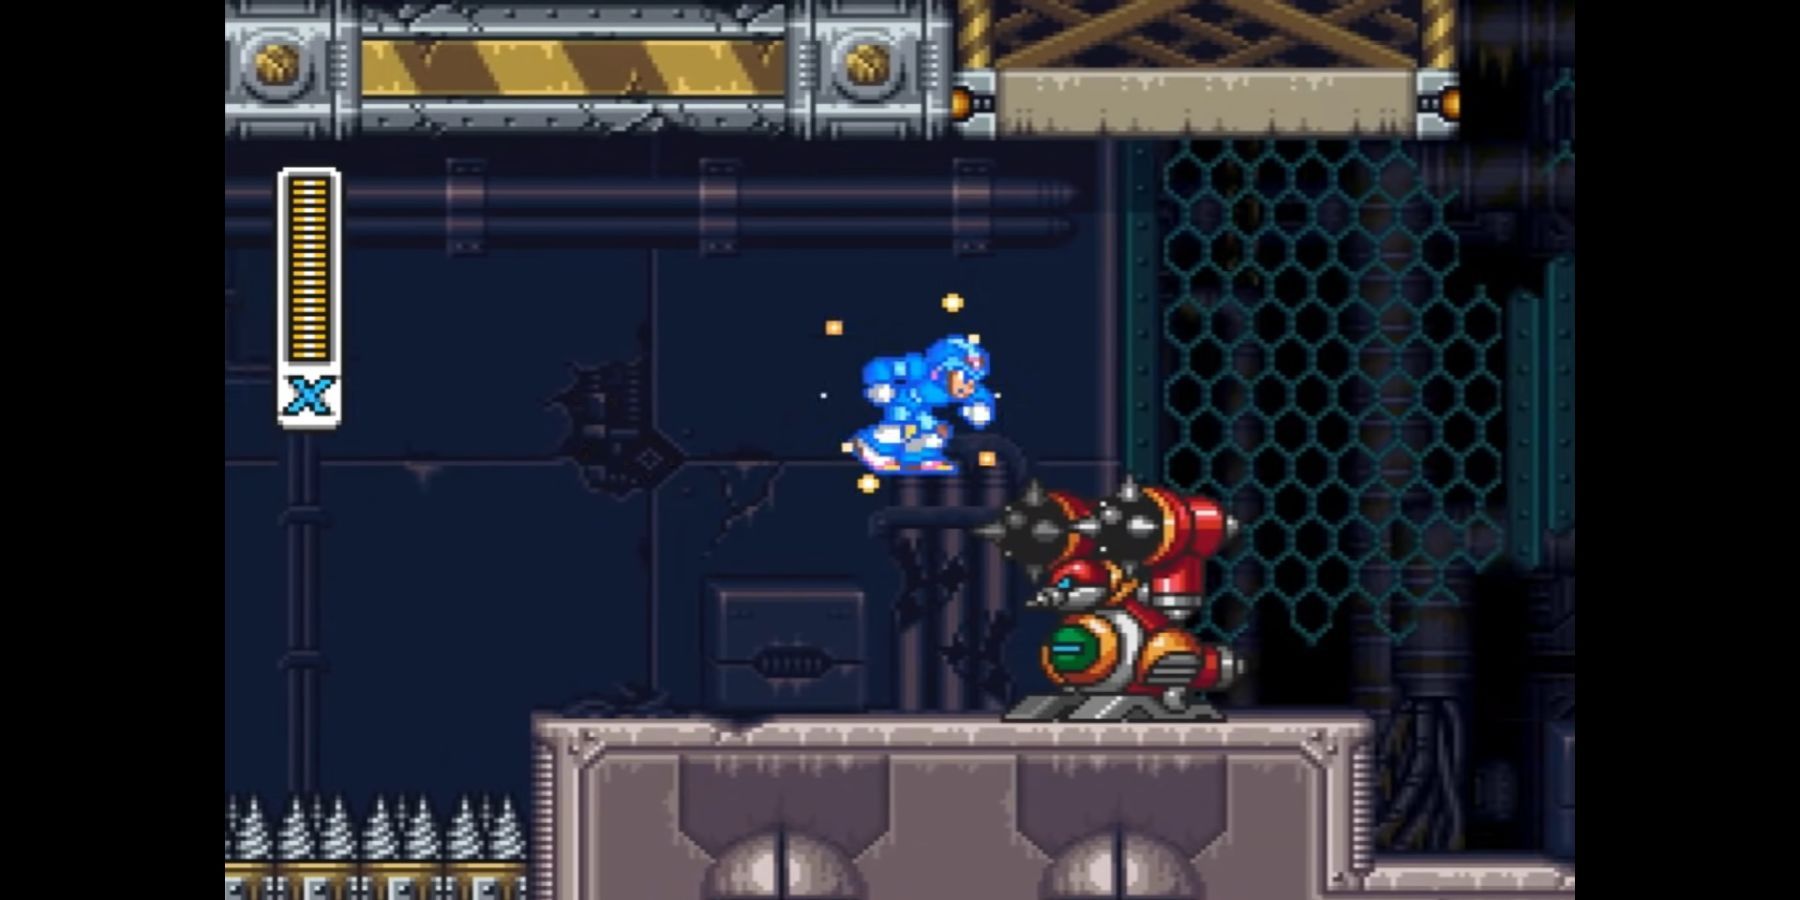 Mega Man encountering one of Dr Wily's robots